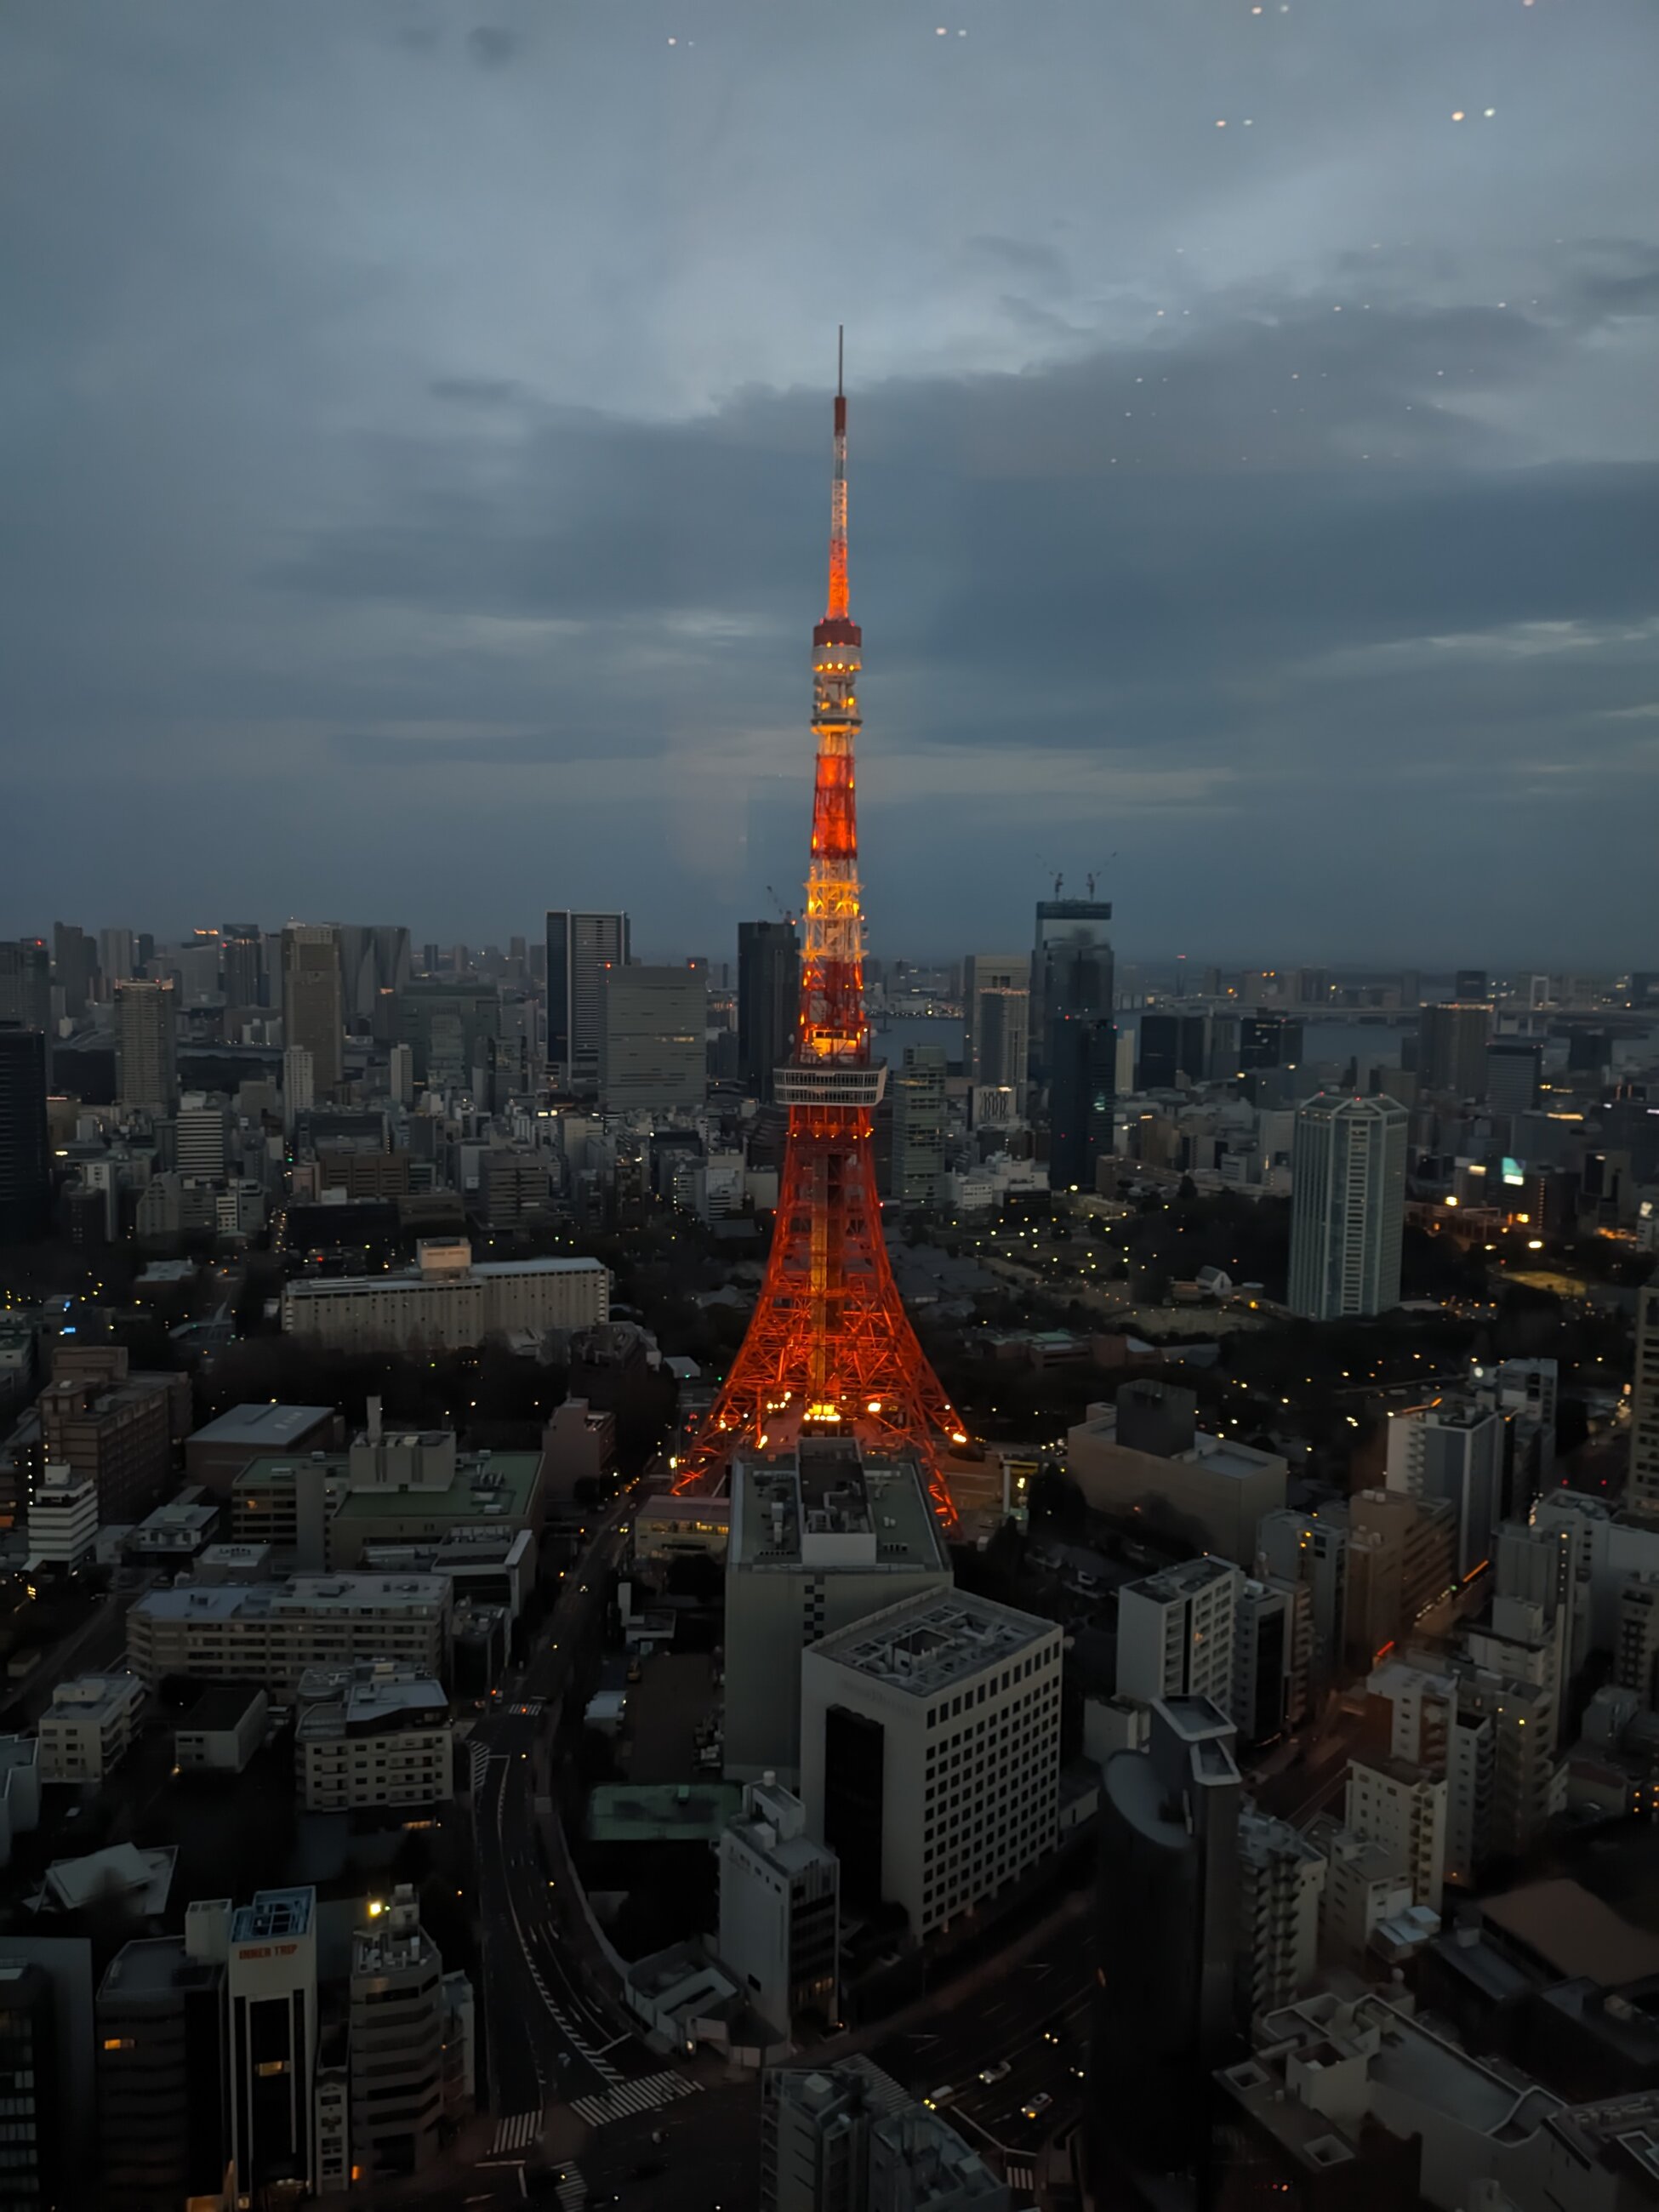 Tokyo tower, seen from the observation deck in Azabudai Hills